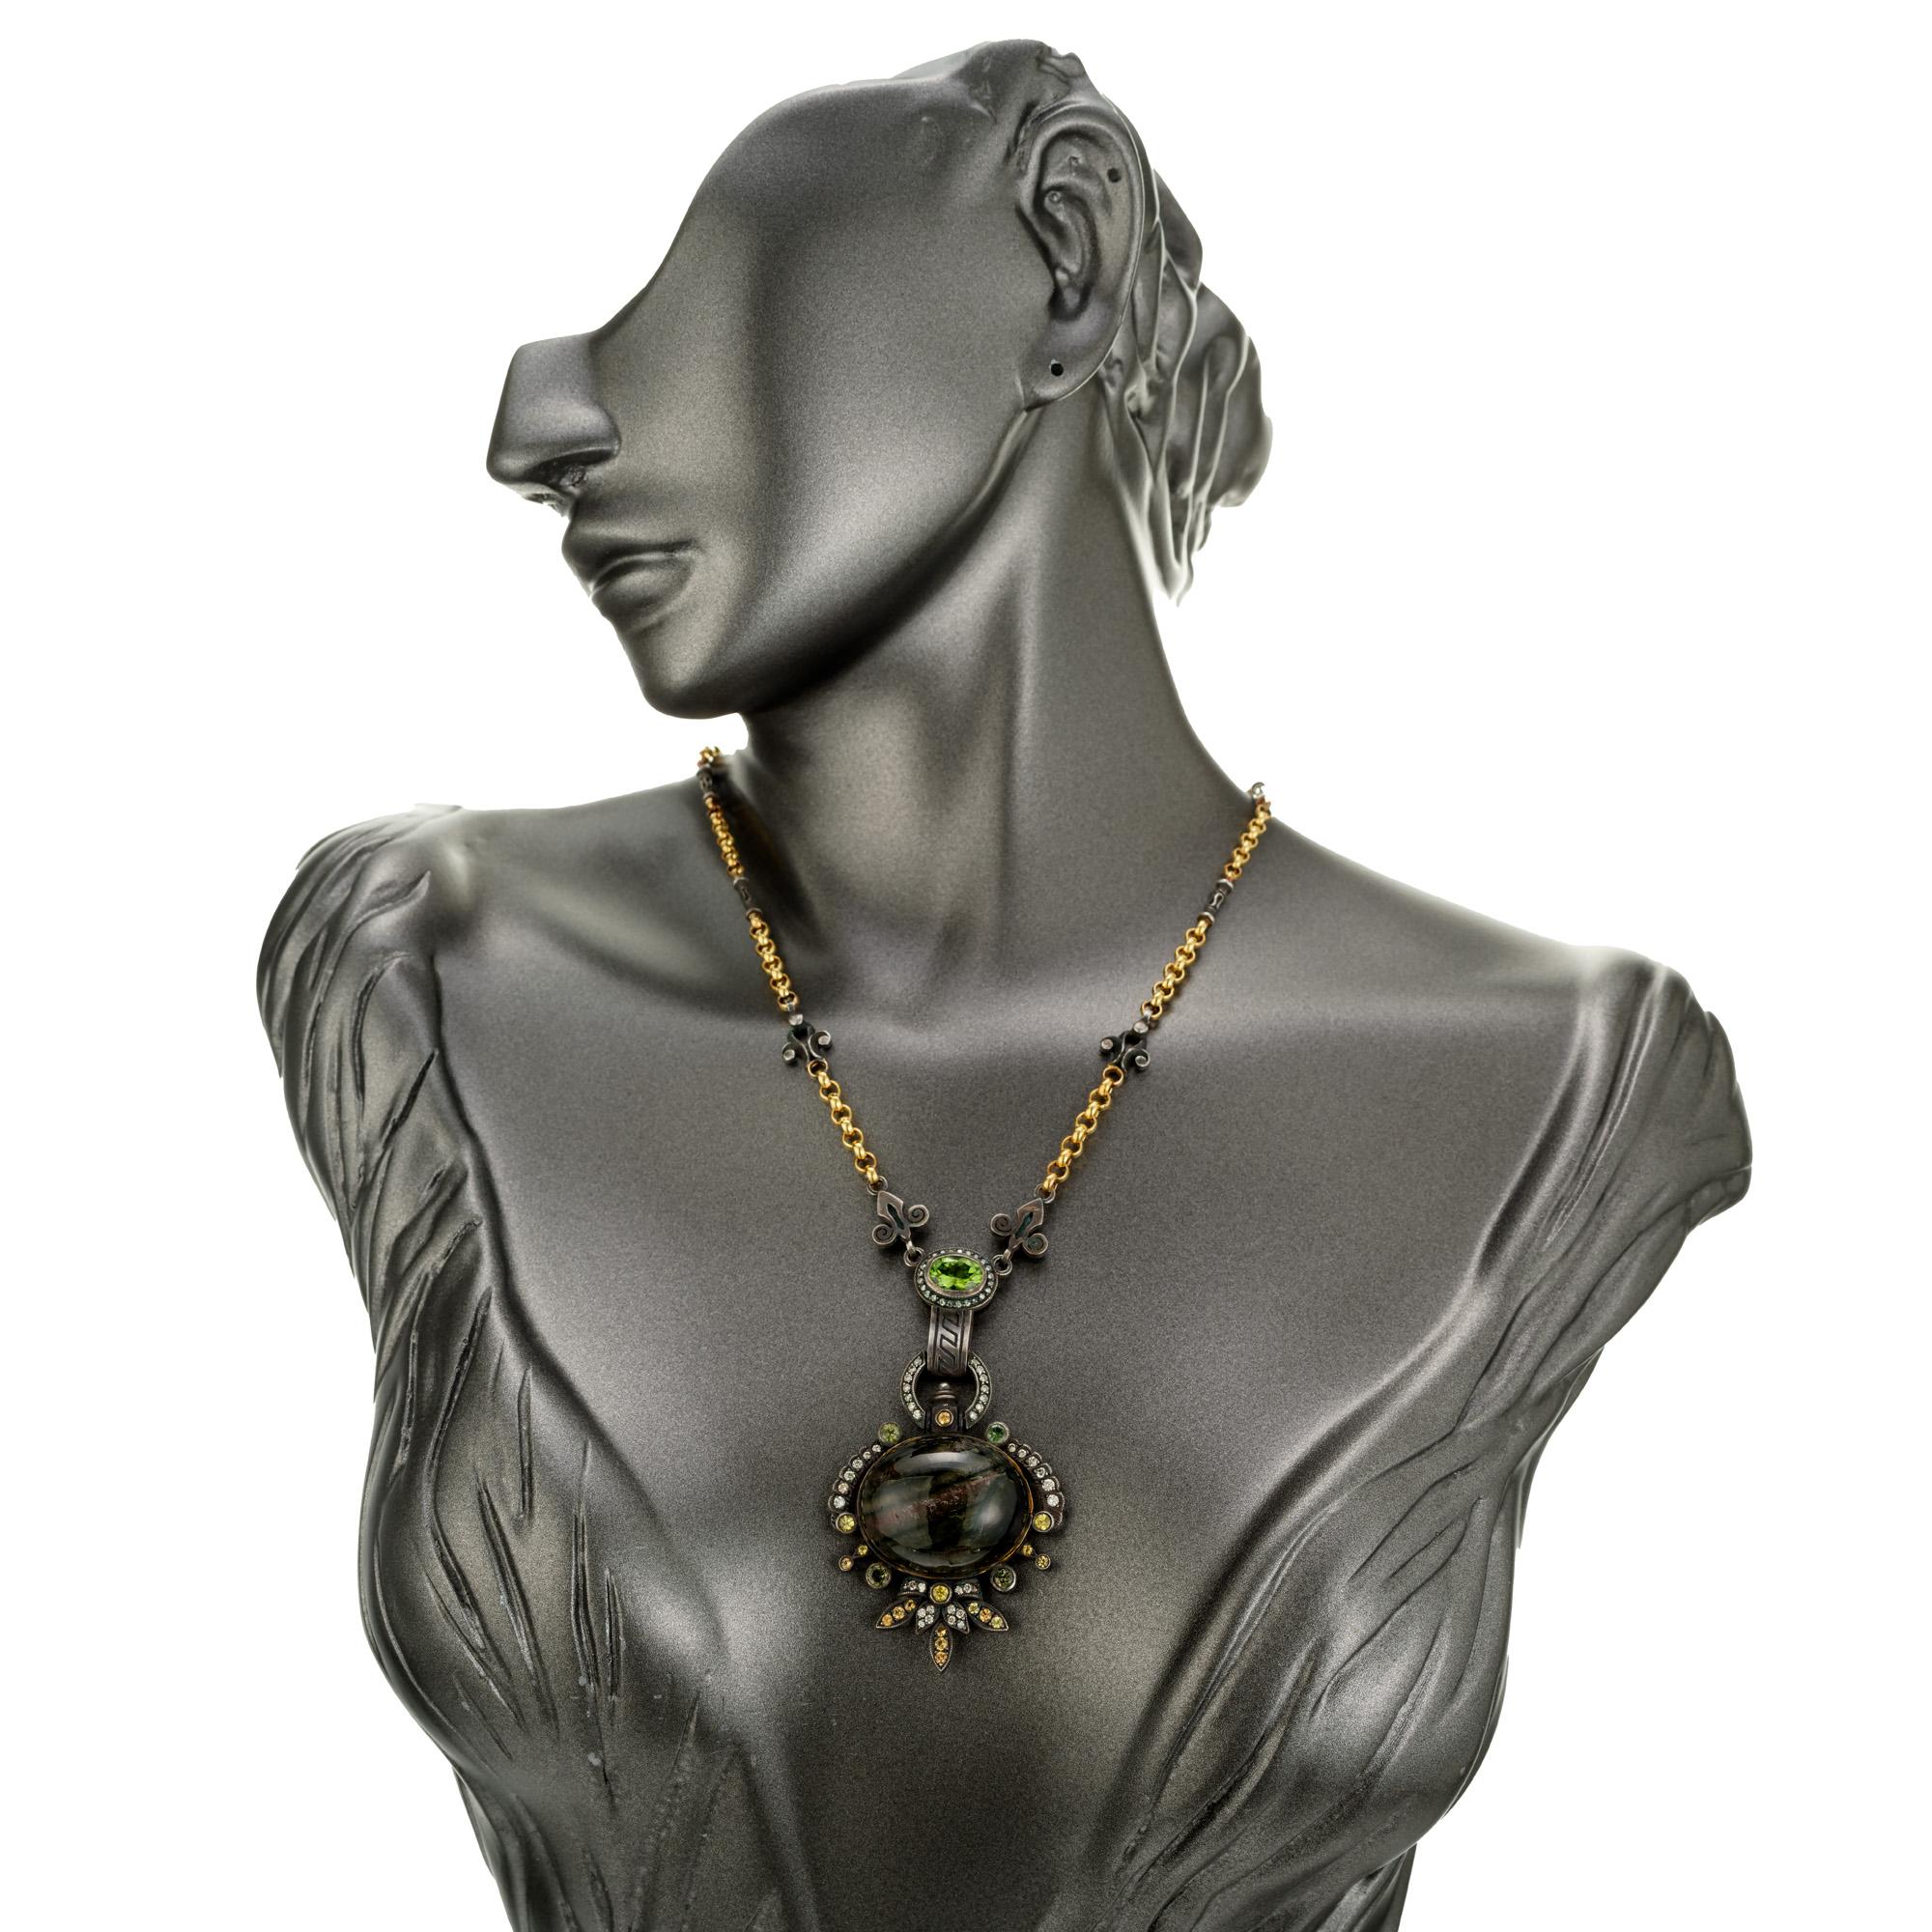 KK Wearable Sculpture Etruscan Tourmaline Diamond Silver Gold Pendant Necklace In Excellent Condition For Sale In Stamford, CT